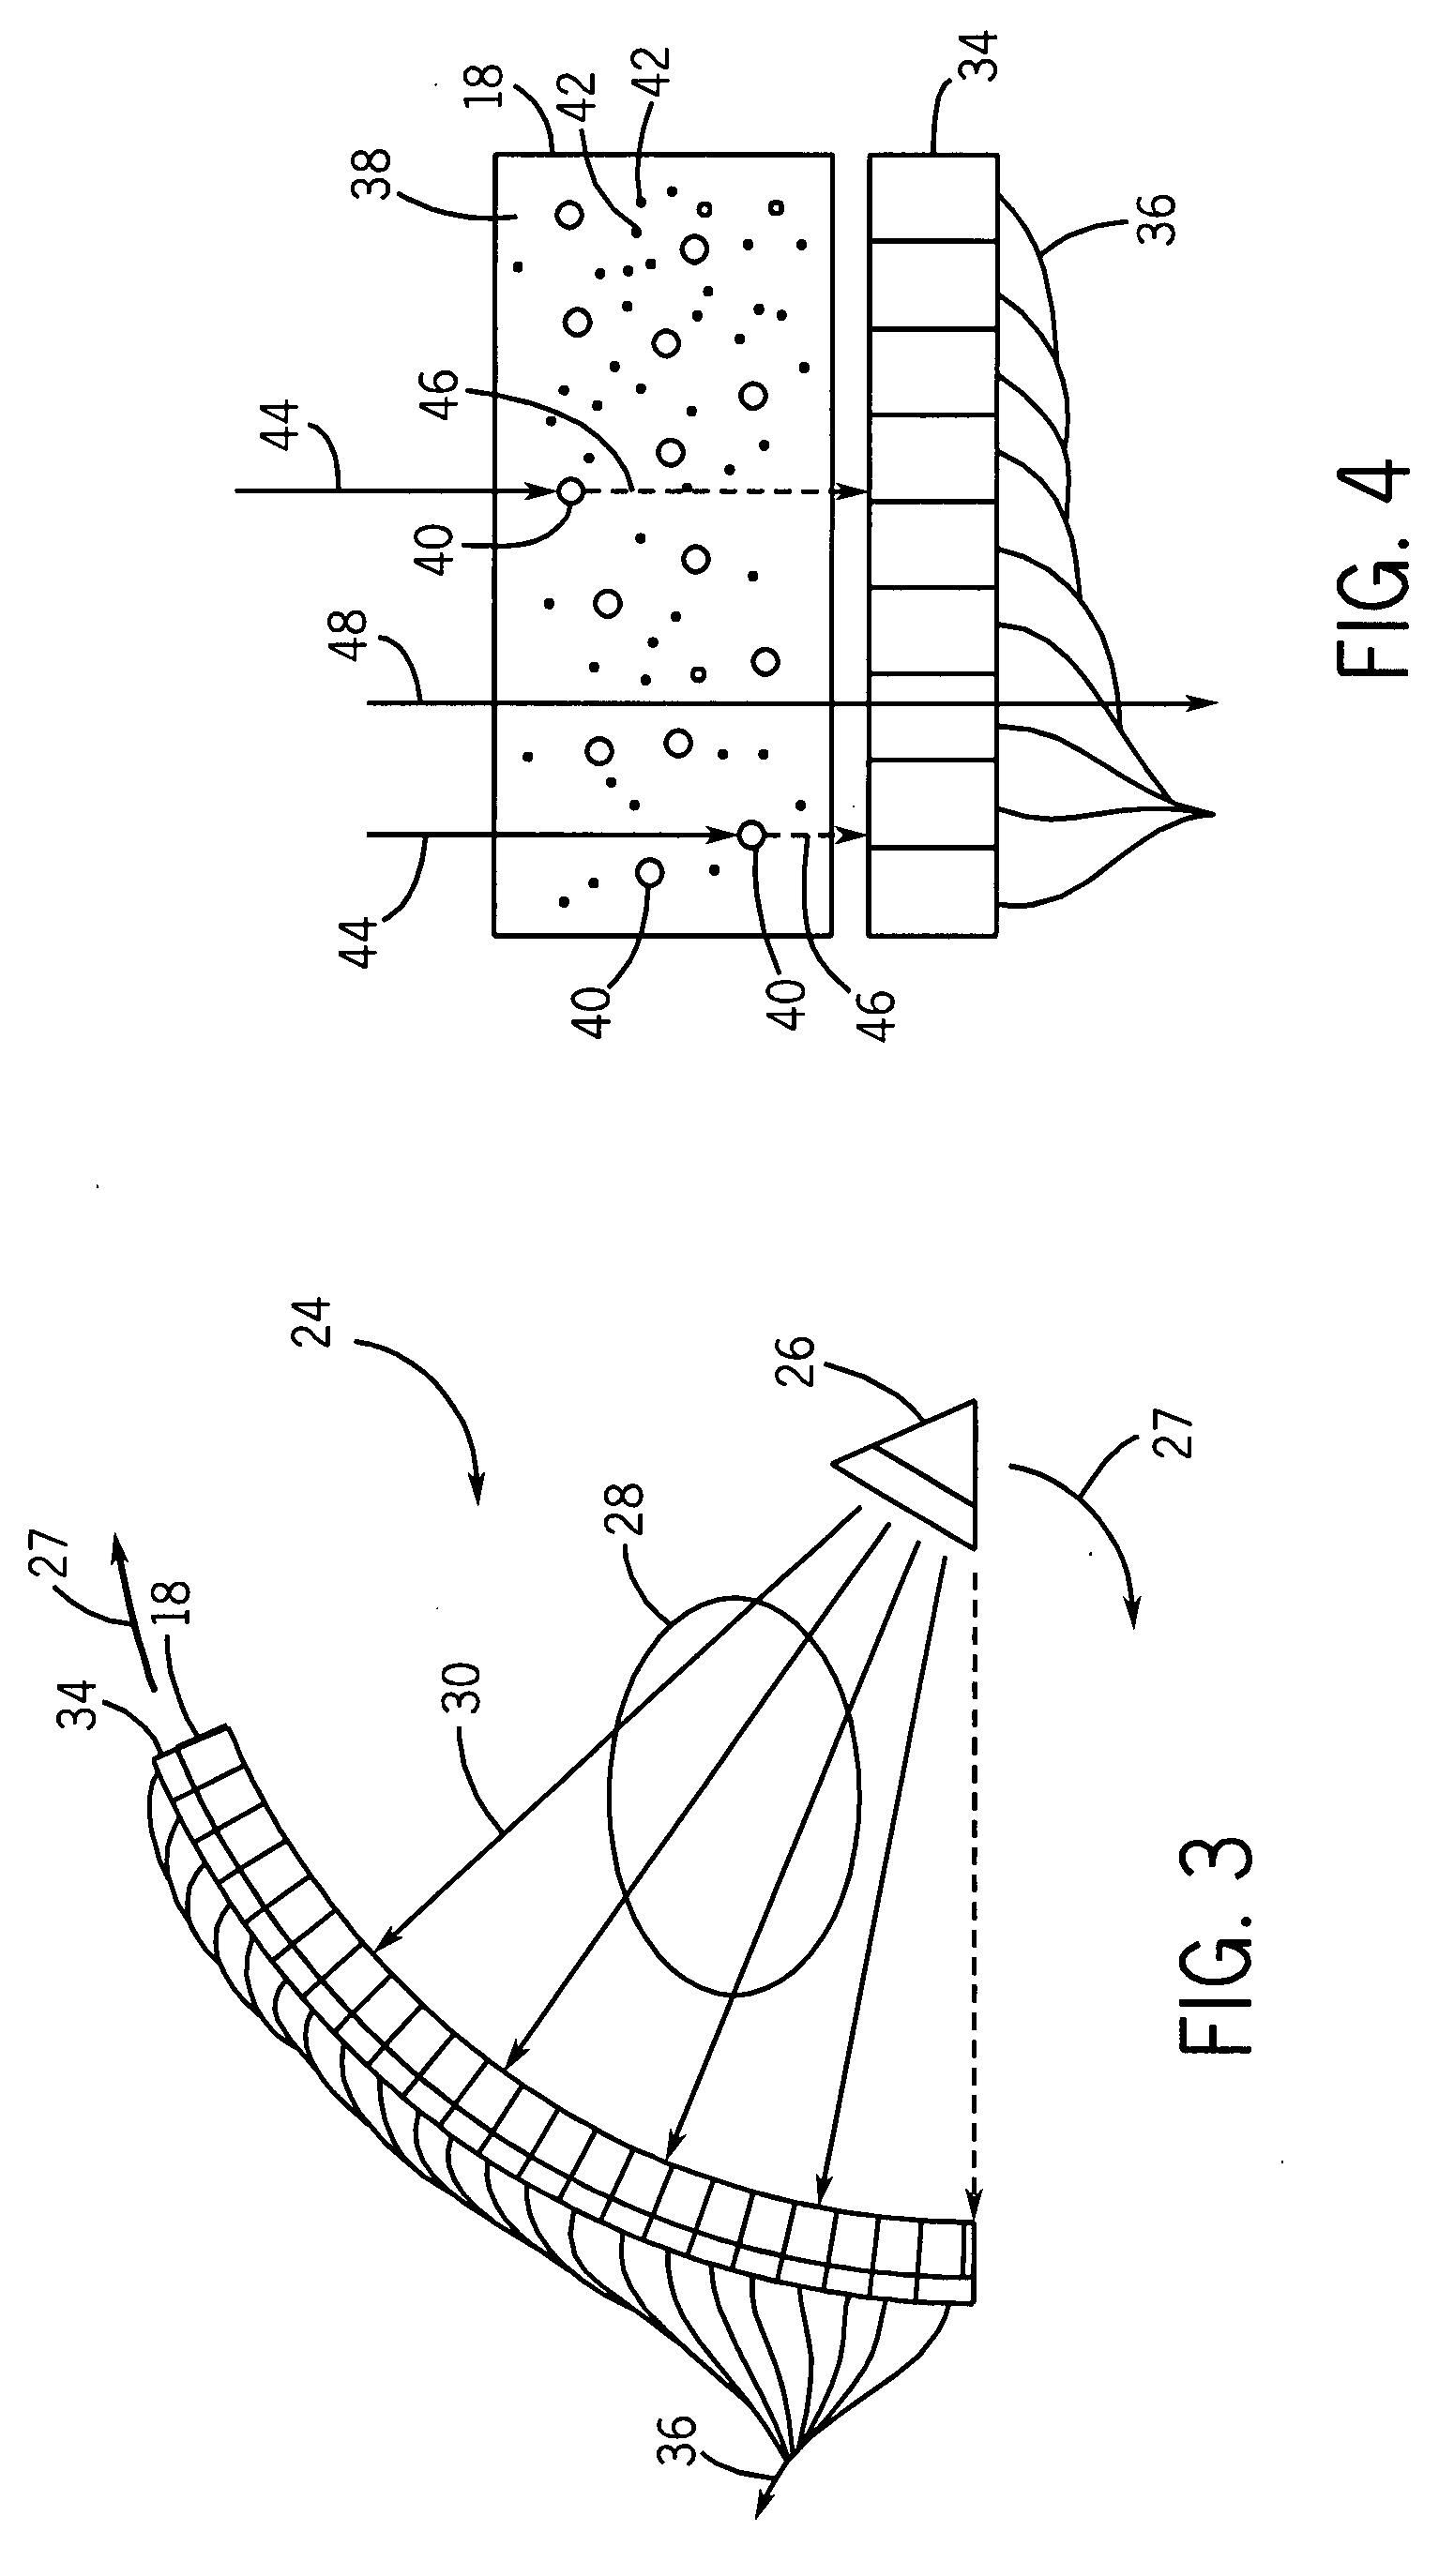 Nano-scale metal halide scintillation materials and methods for making same